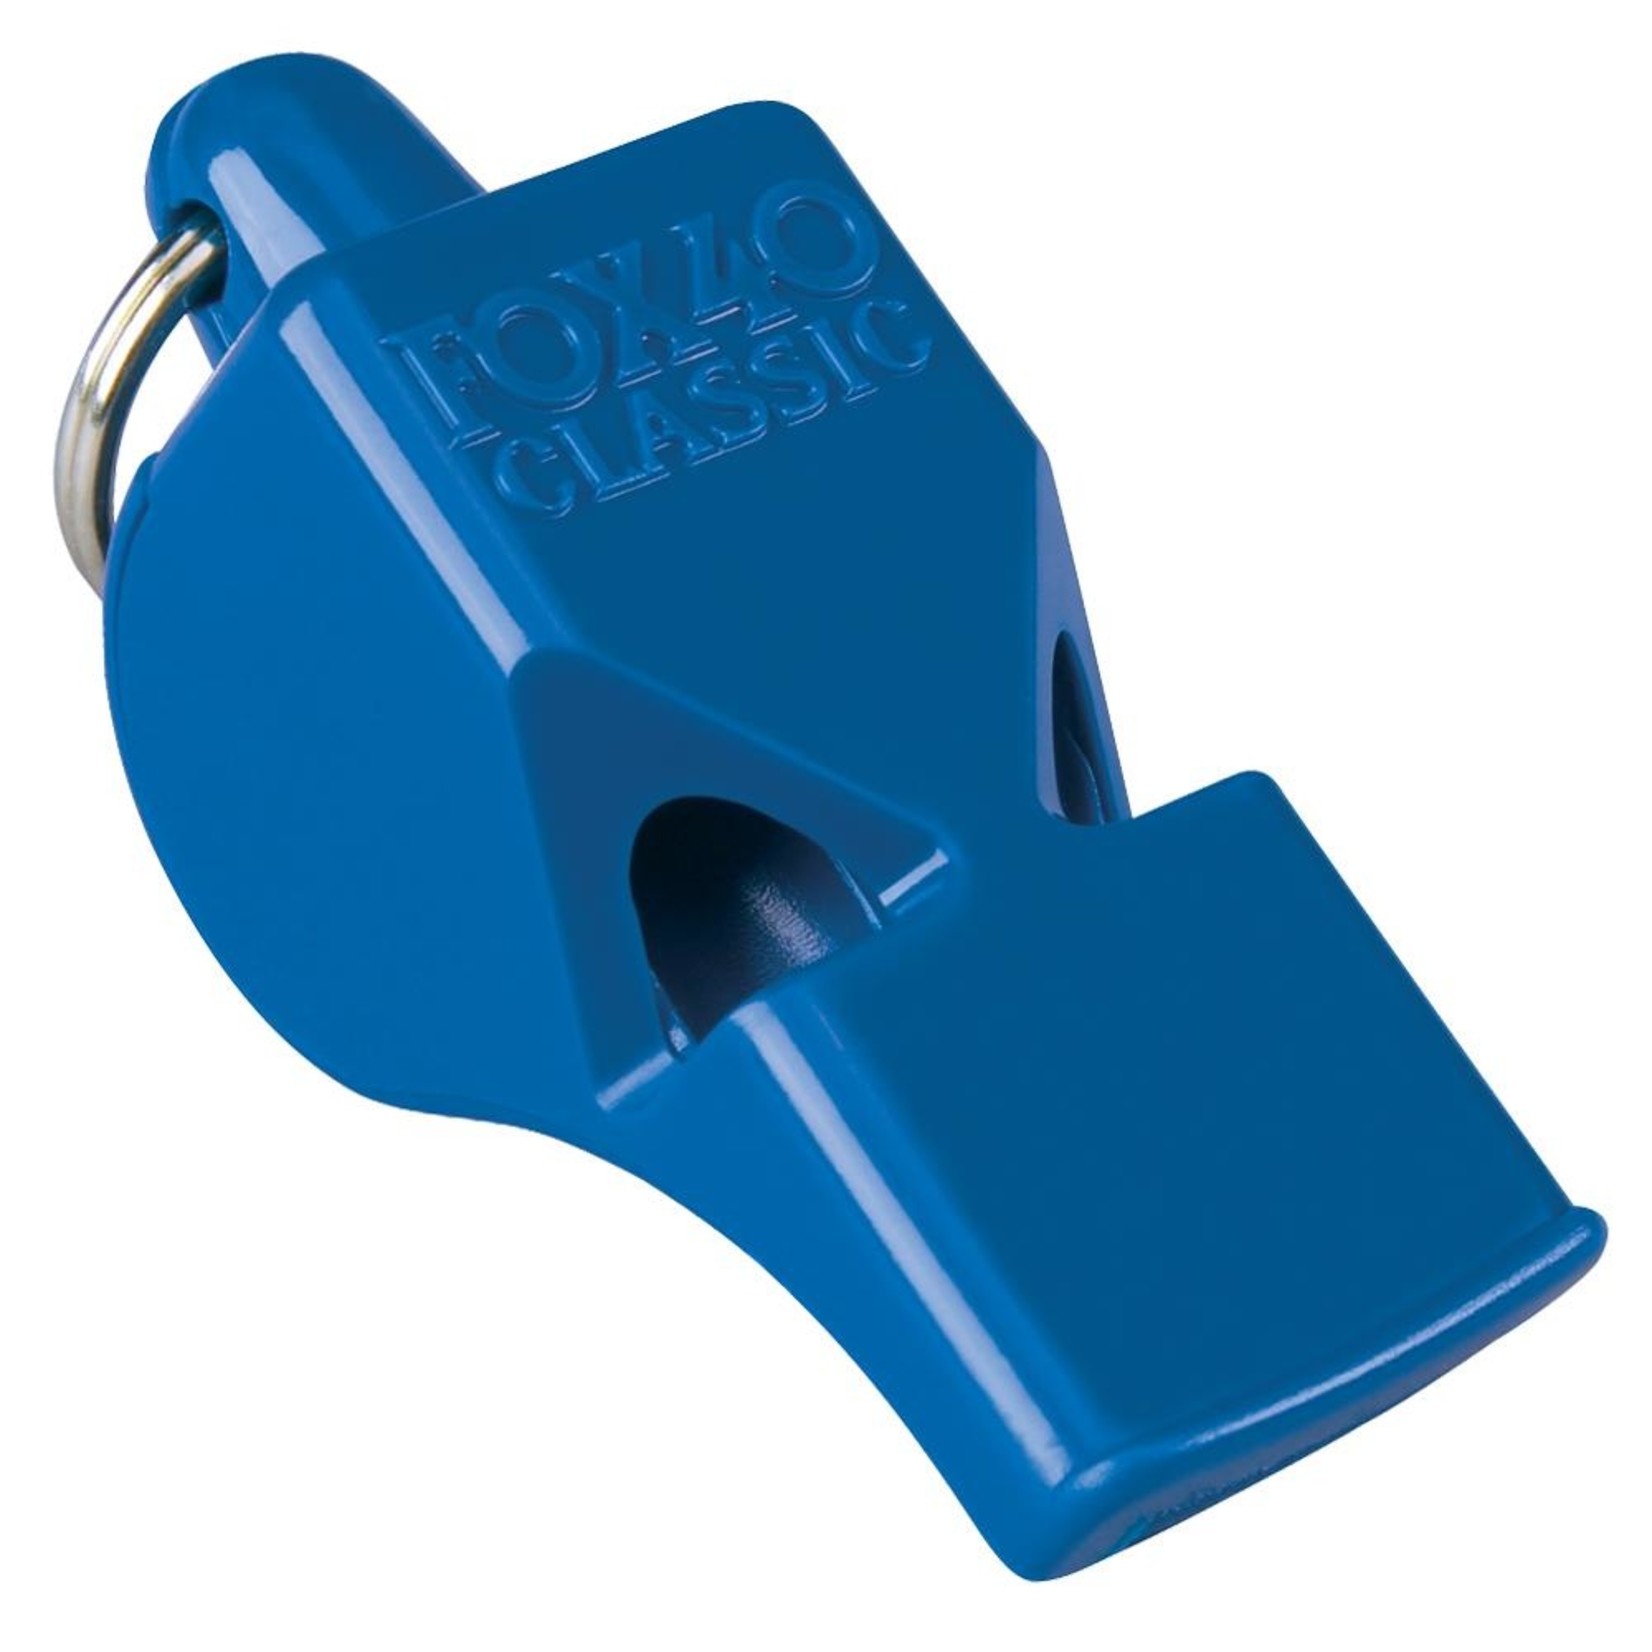 Fox 40 Safety Whistle at